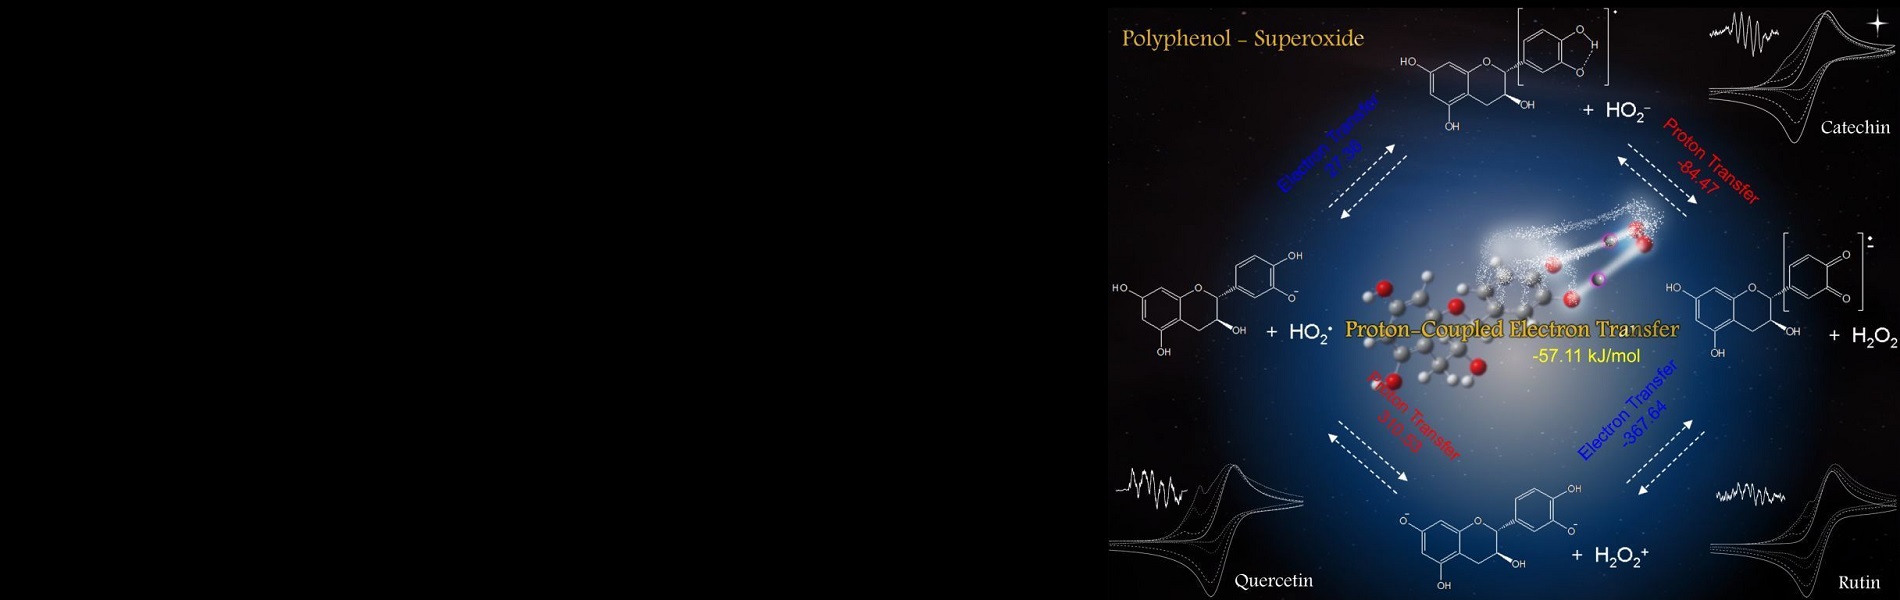 Superoxide Elimination by Polyphenol